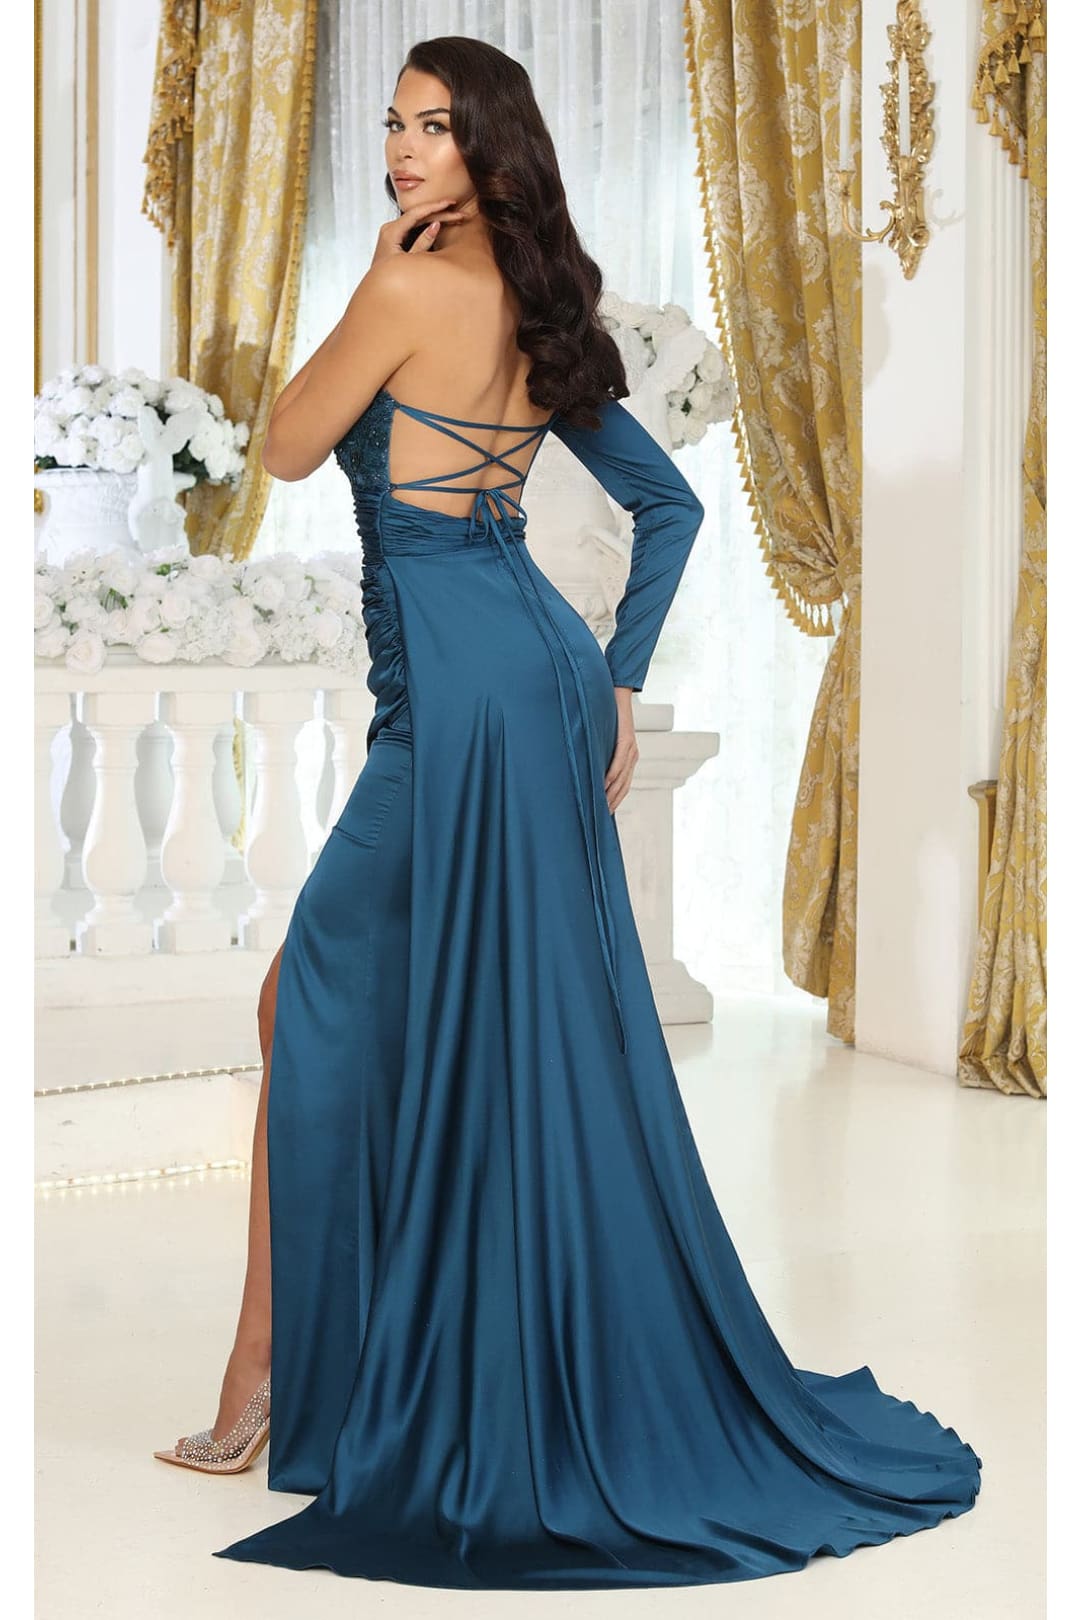 May Queen MQ1985 Satin Strappy Back One Sleeve Prom Evening Gown - Dress